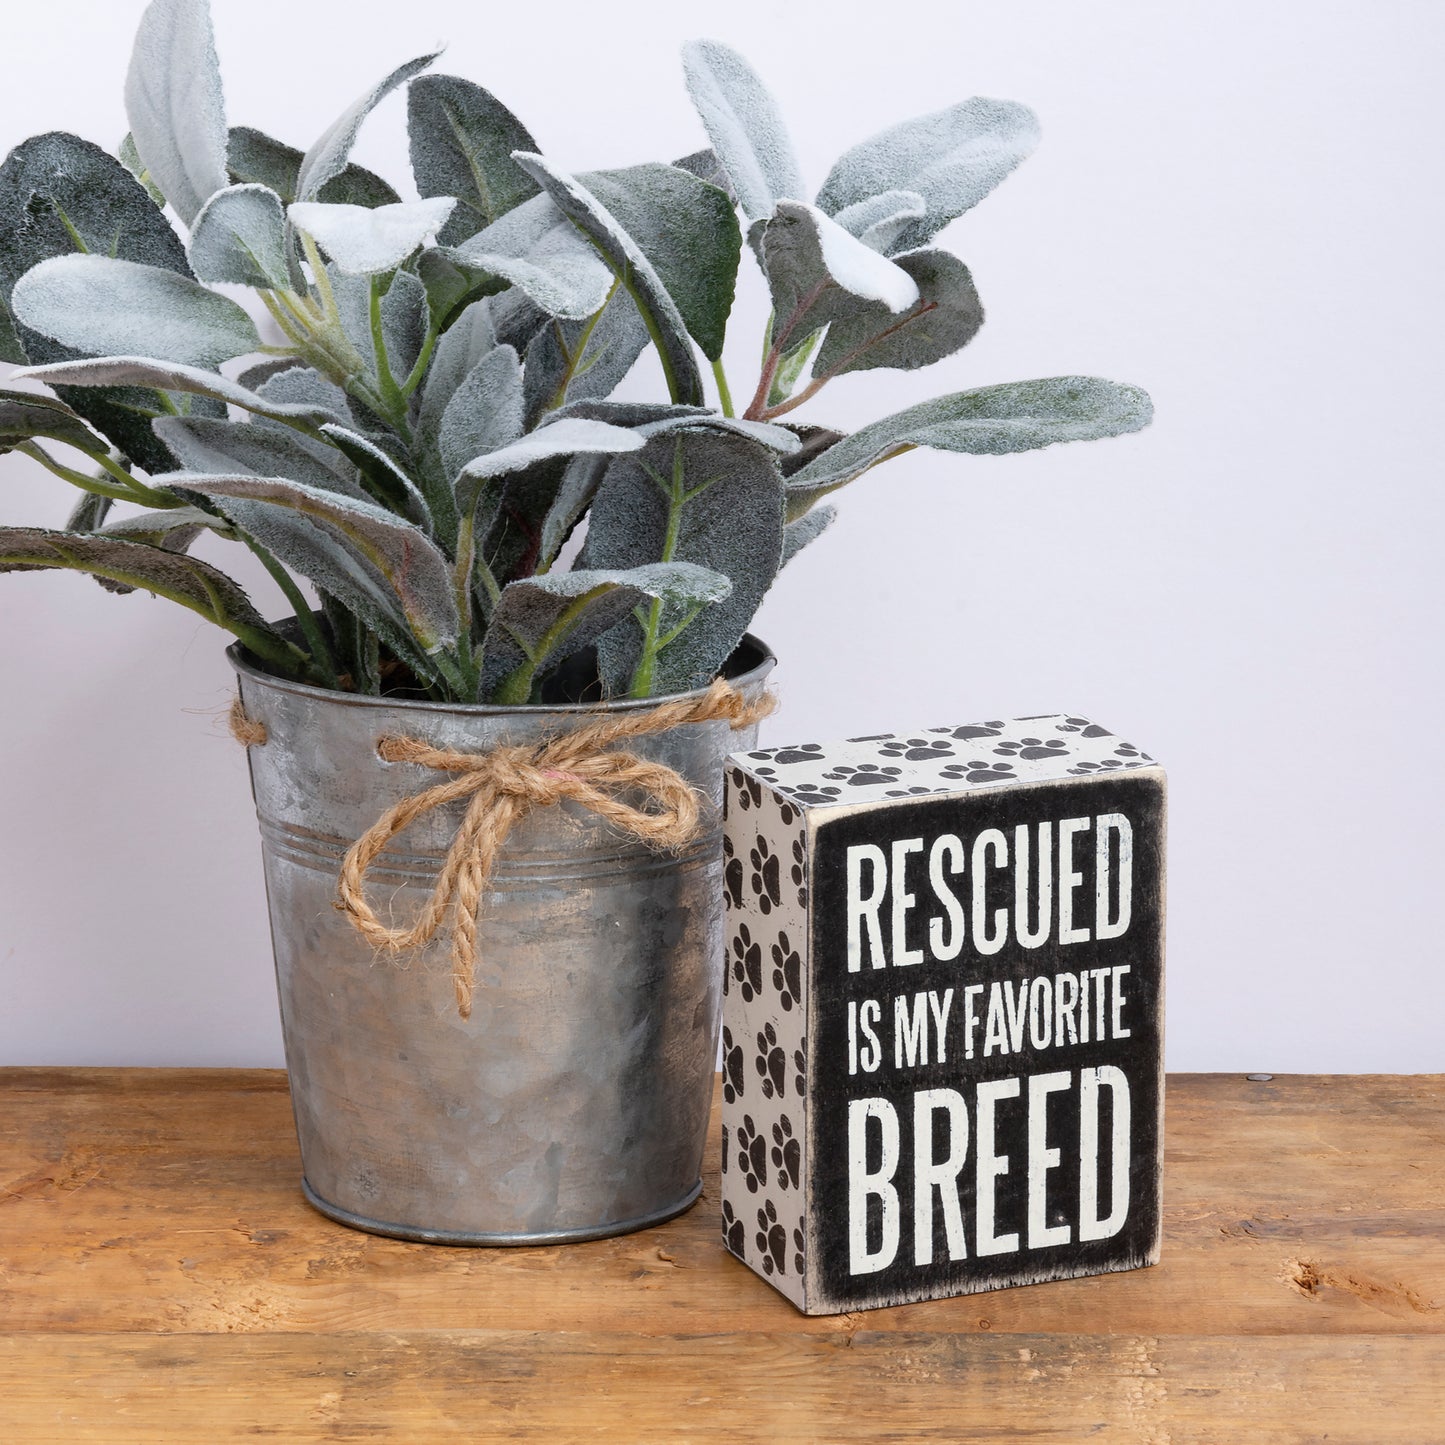 Box Sign - "Rescued Is My Favorite Breed"